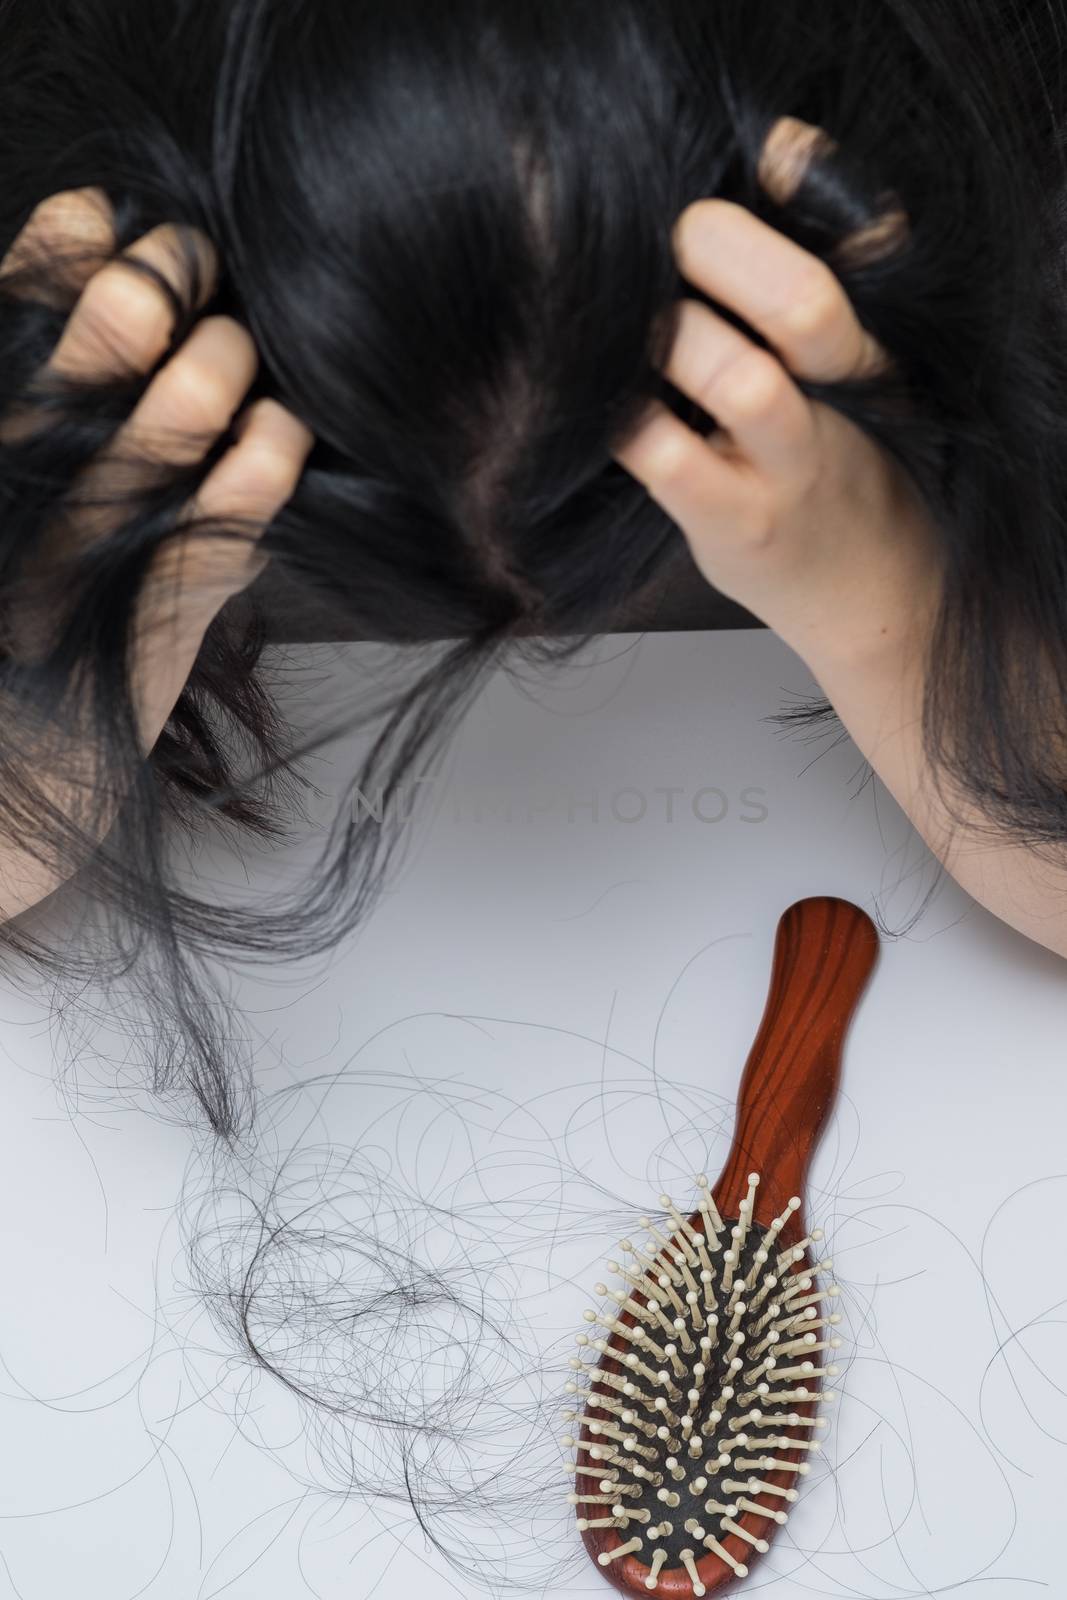 woman hair loss problem by zneb076